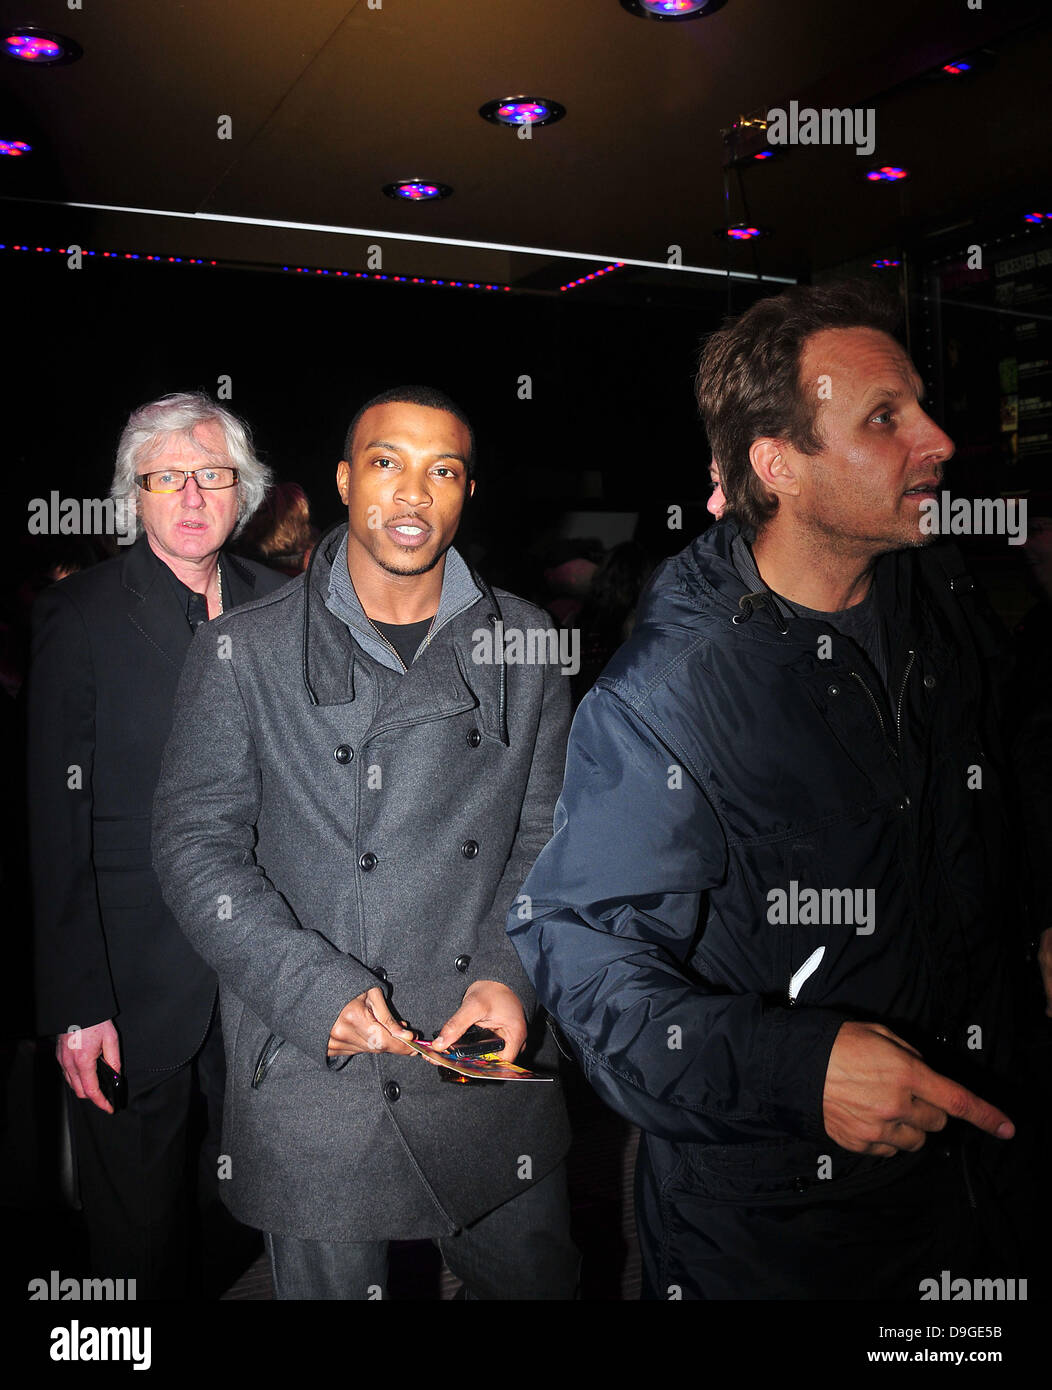 Ashley Walters Londoner Premiere von "Anuvahood" an der Empire Leicester Square London, England - 15.03.11 Stockfoto